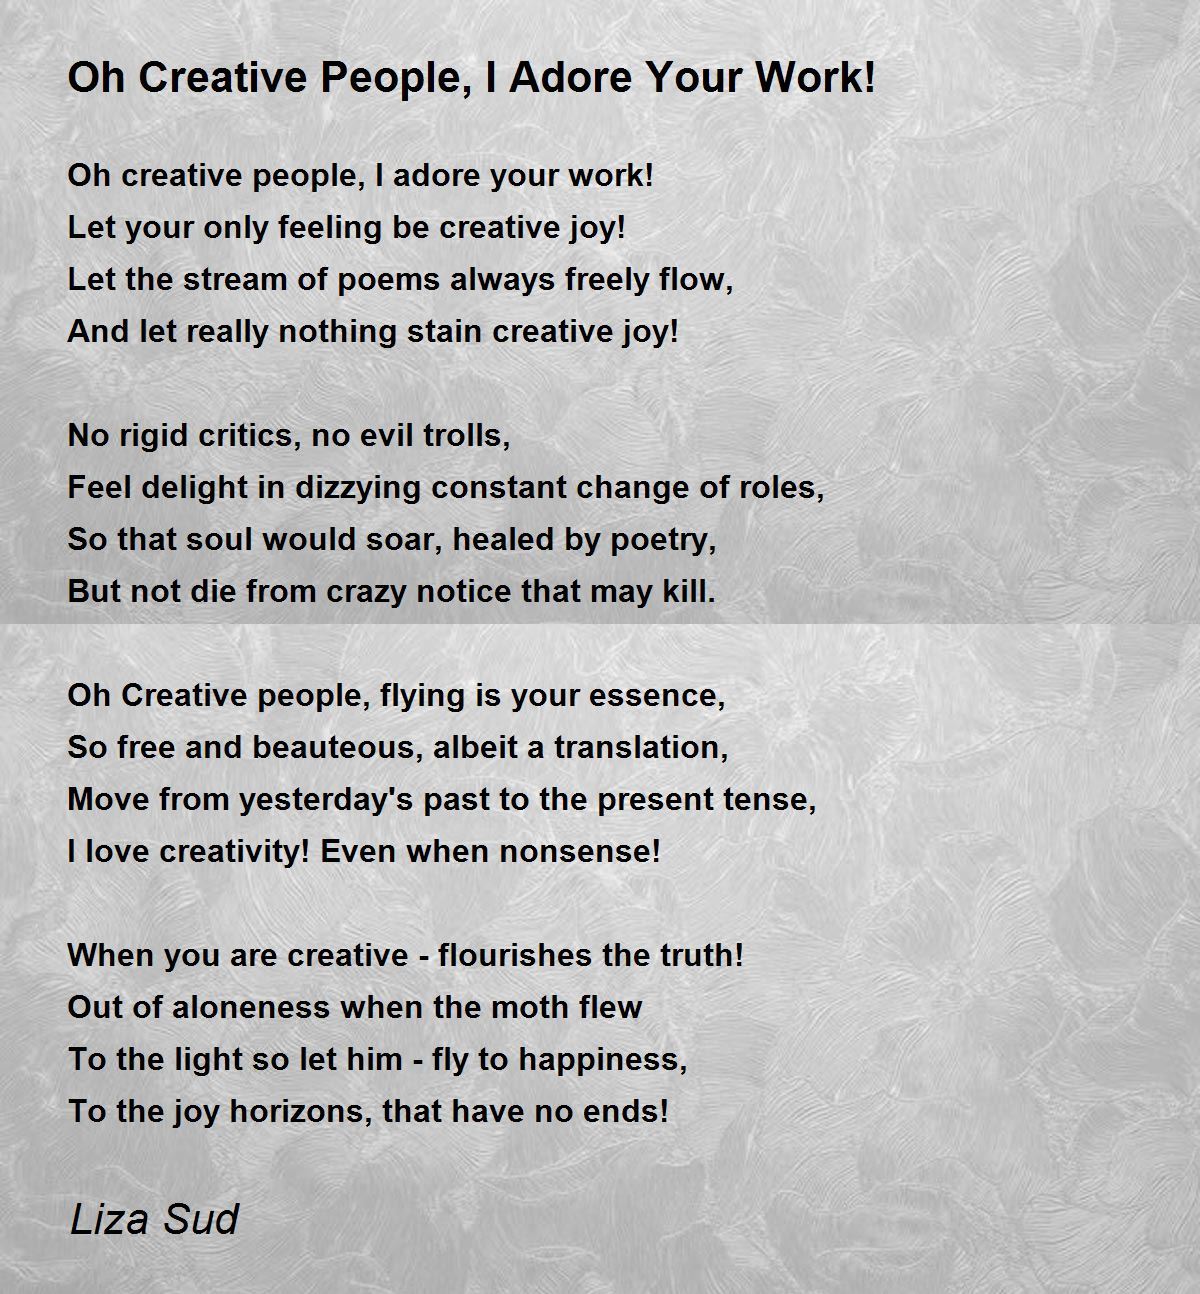 Oh Creative People, I Adore Your Work! - Oh Creative People, I